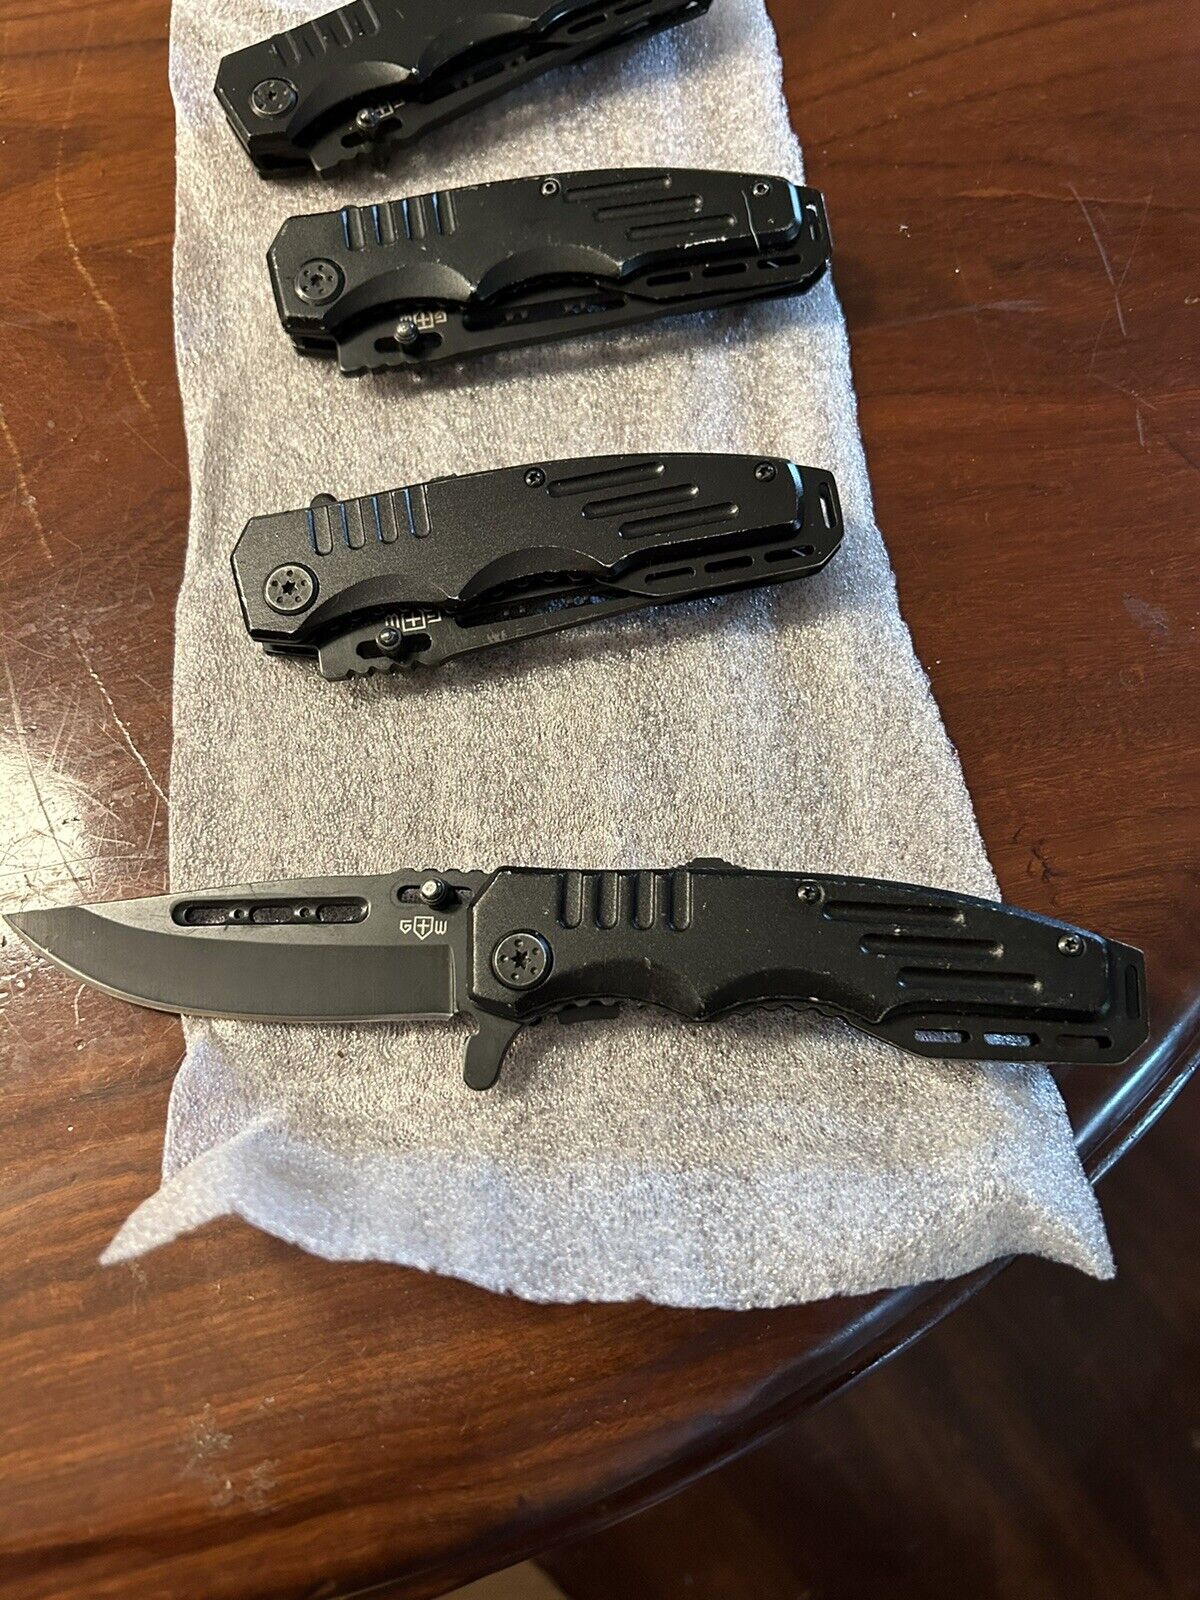 LOT OF 4 Grand Way Tactical Pocket Knife Assisted Open 440C Steel, Safety